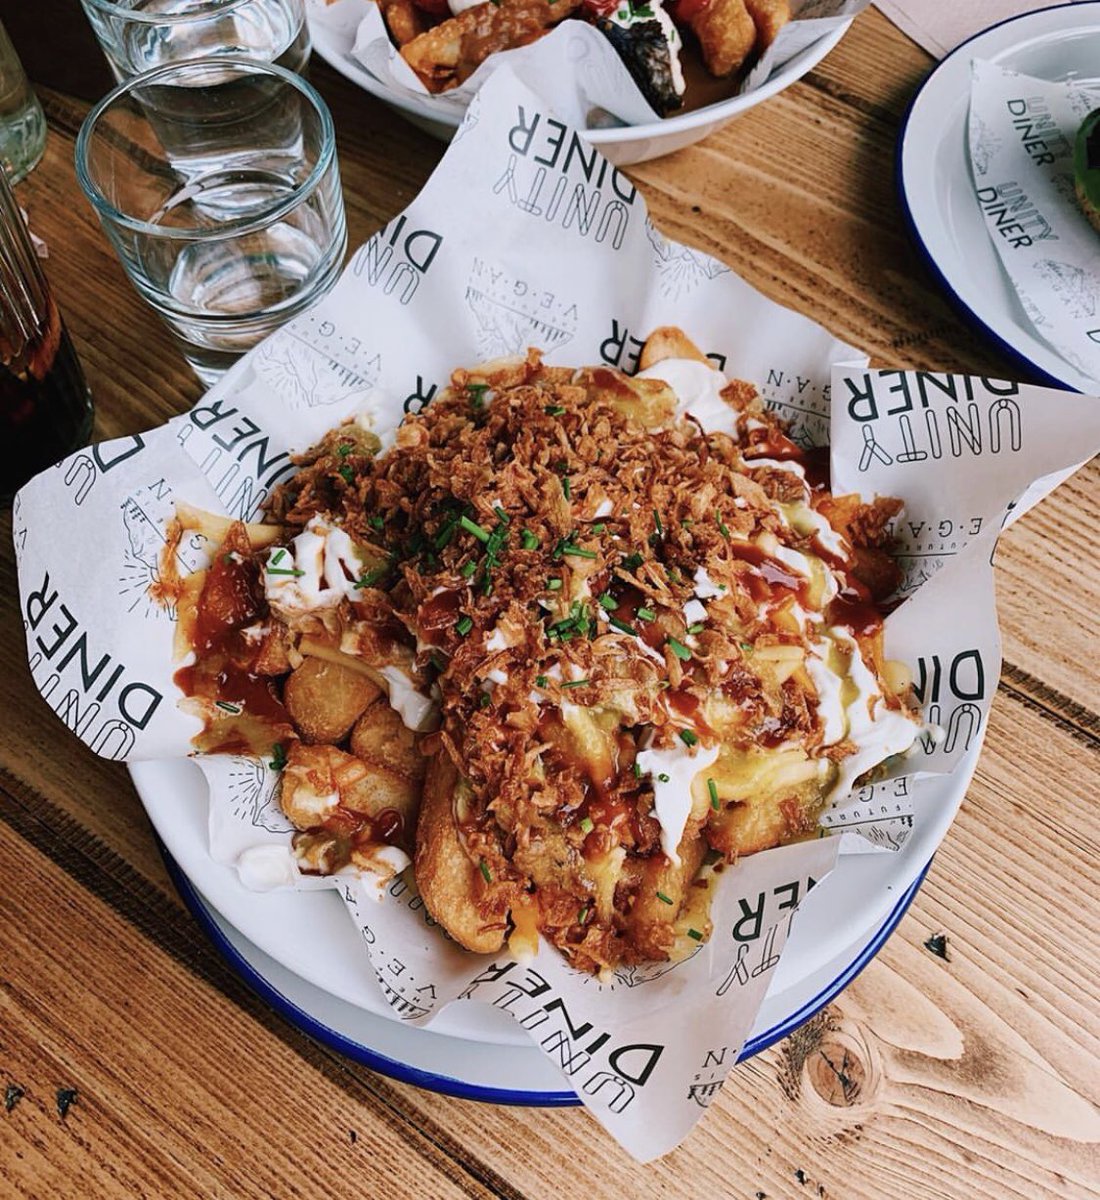 That dirty loaded fries mountain tho🔥 ⁣⁣ ⁣⁣ Chunky fries loaded with 3 cheezes, döner kebab, smothered in UD BBQ sauce, aioli, jalapeño sauce & topped with fresh herbs & crispy onions 🤯🤯🤯 ⁣⁣ ⁣⁣ Image: instagram.com/jenniefriendly #unitydiner #vegan